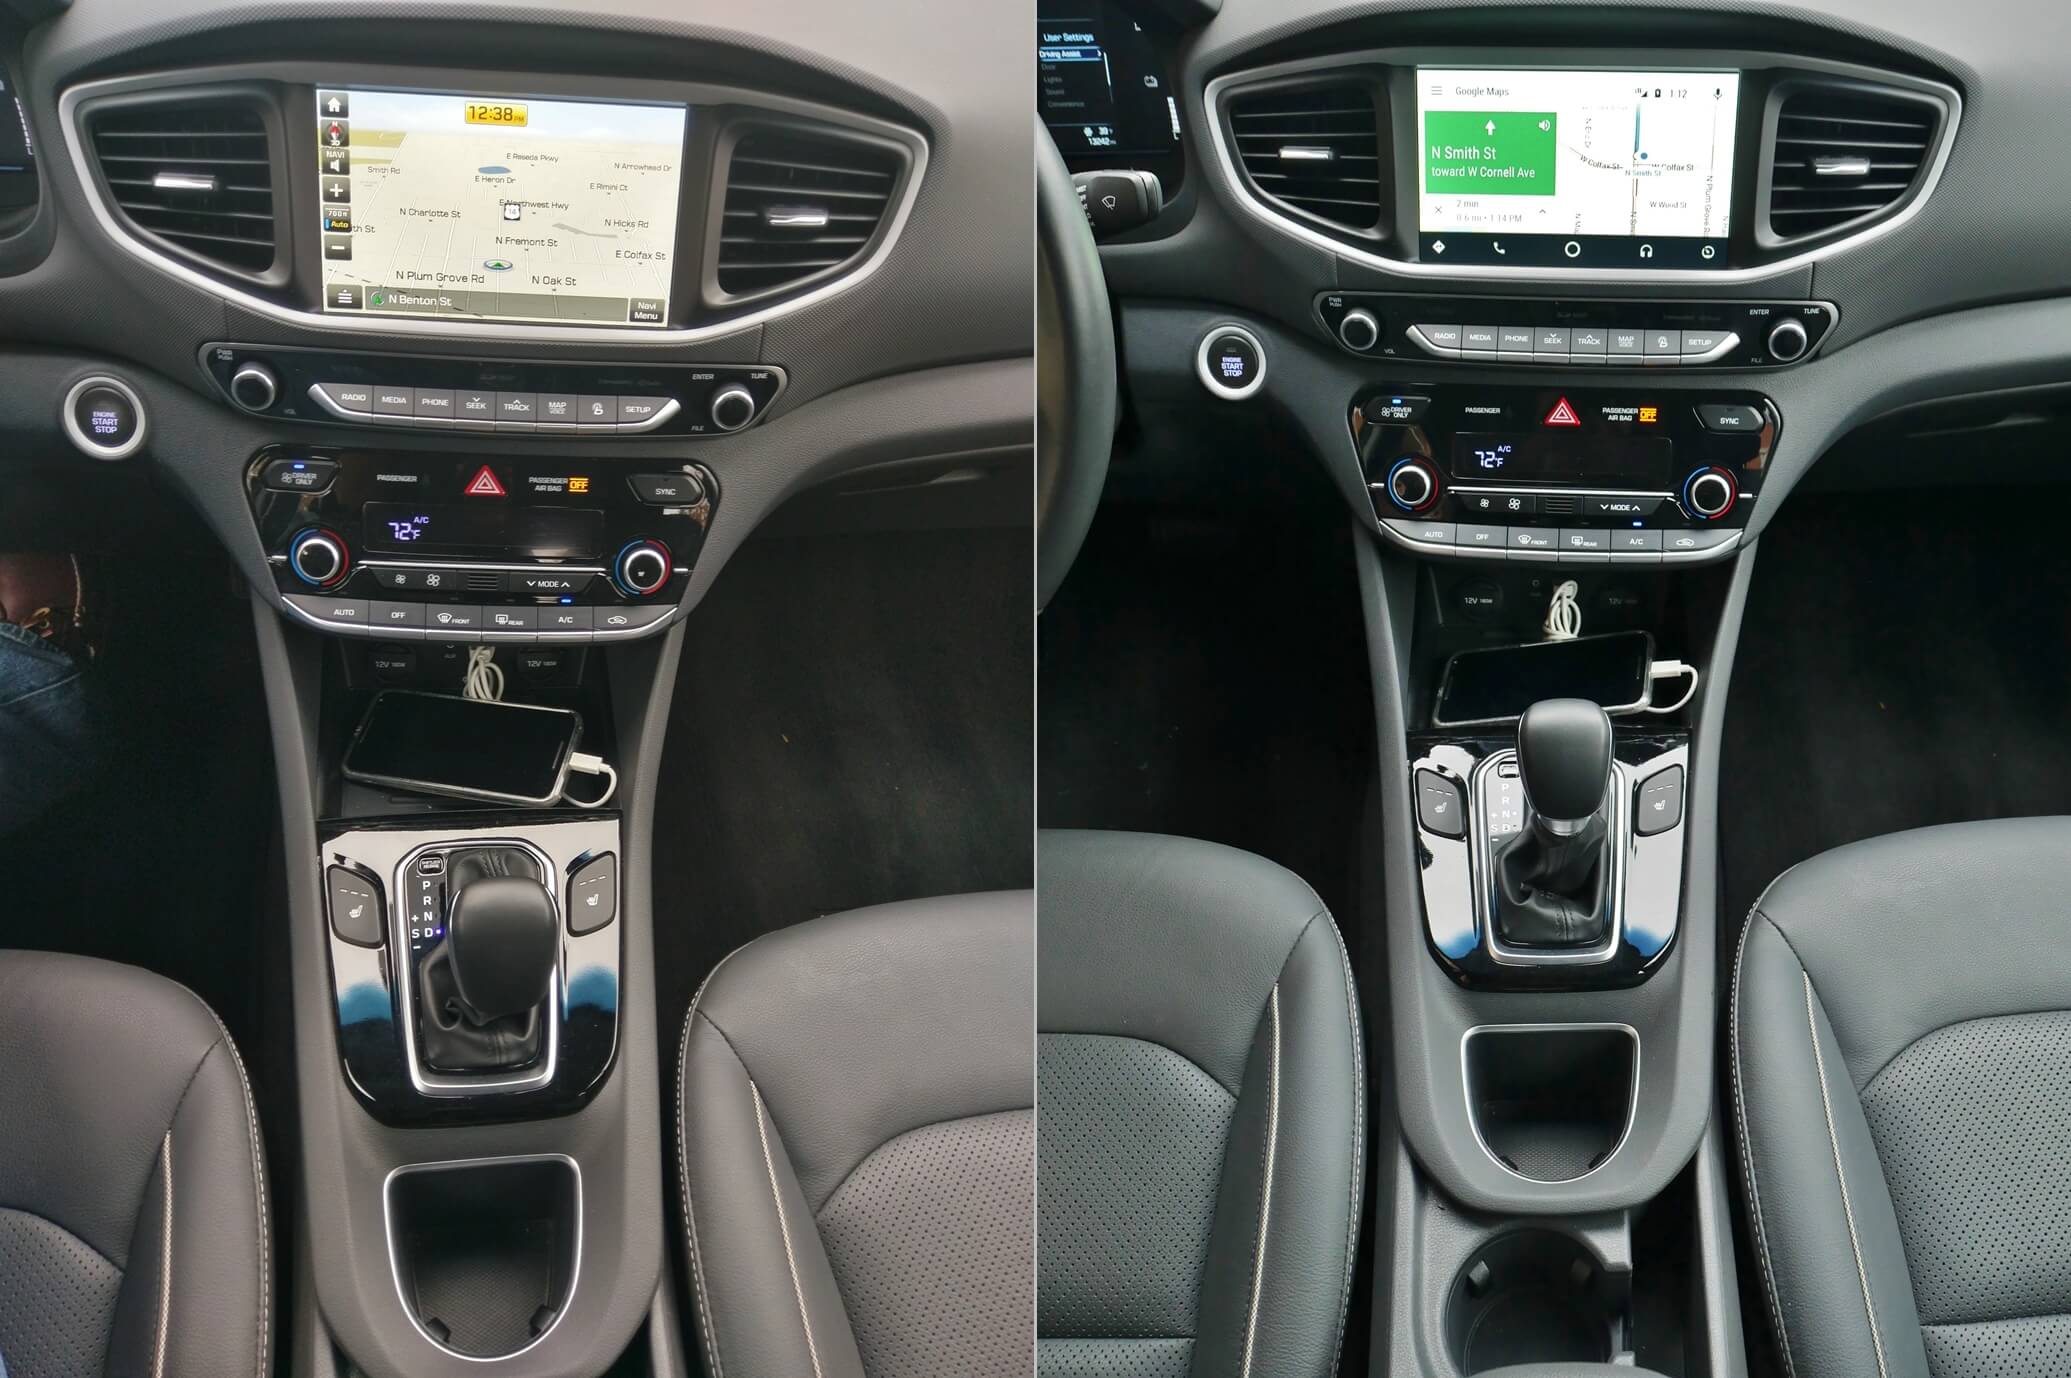 2017 Hyundai Ioniq Hybrid Limited: 8"-inch LCD display o GPS Navigation systems compared: (LEFT) Hyundai HDD native voice command/ directions; (RIGHT) Android Auto voice command/ directions